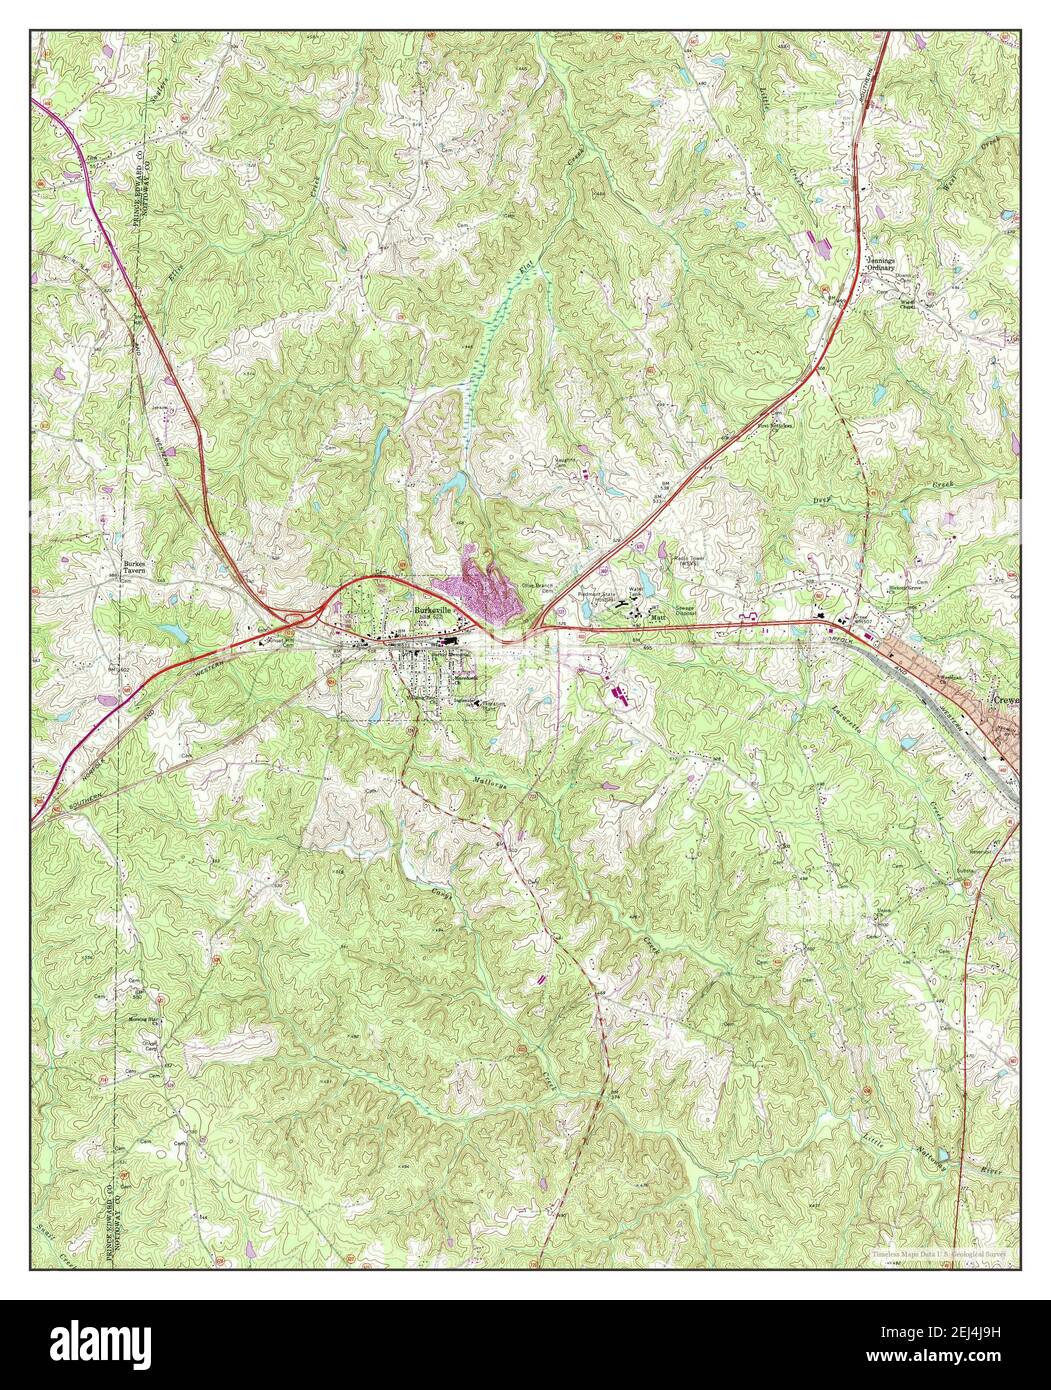 Crewe West, Virginia, map 1968, 1:24000, United States of America by Timeless Maps, data U.S. Geological Survey Stock Photo